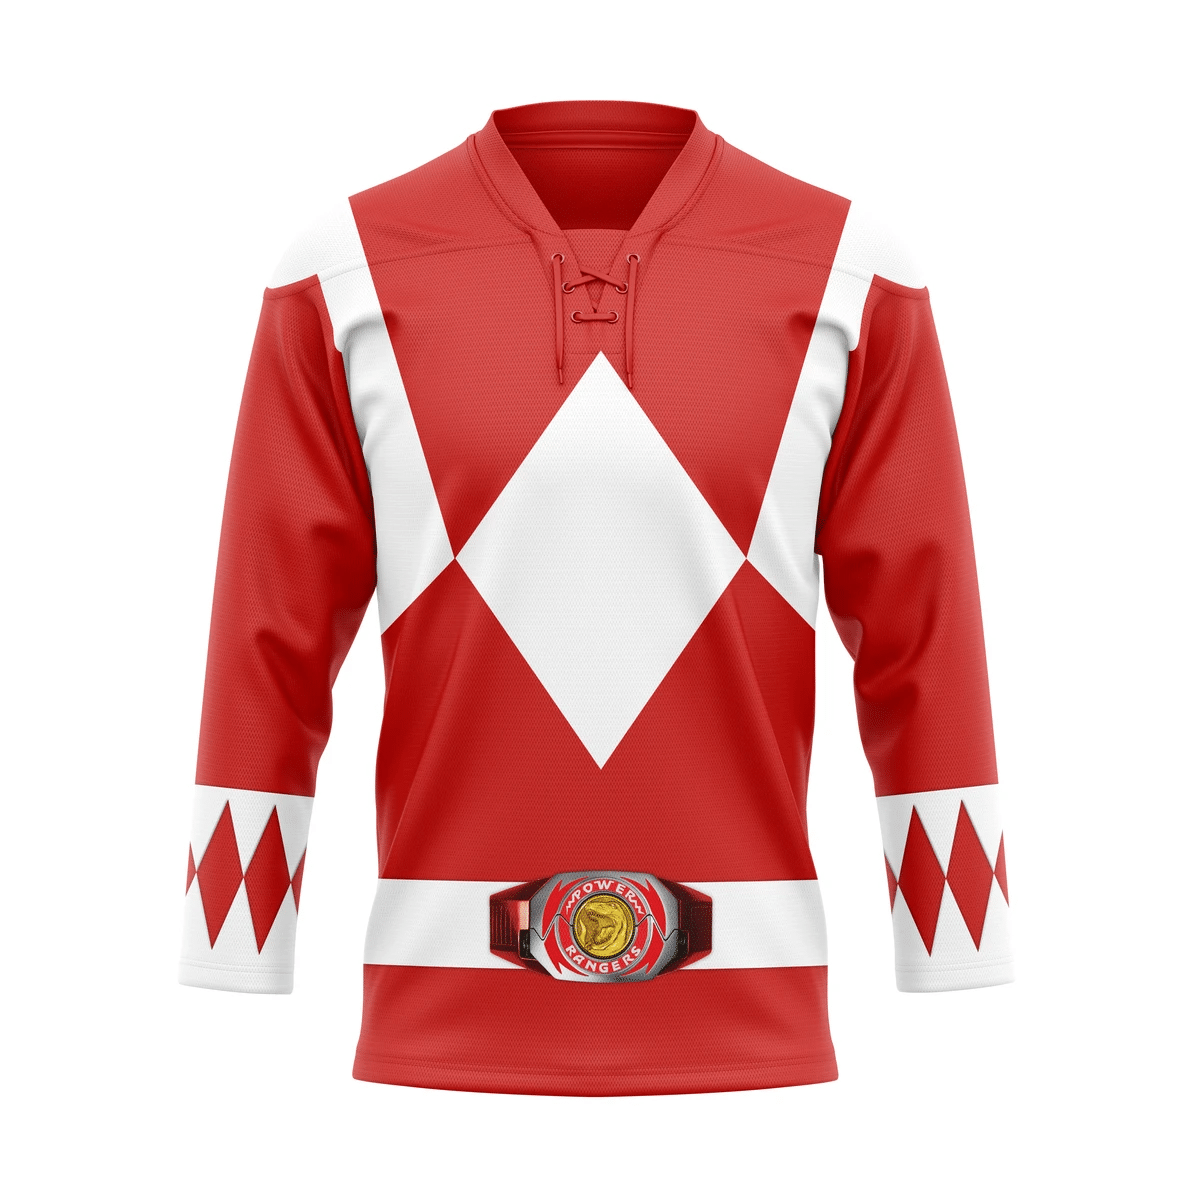 Check out our collection of unique and stylish hockey jerseys from all over the world 136